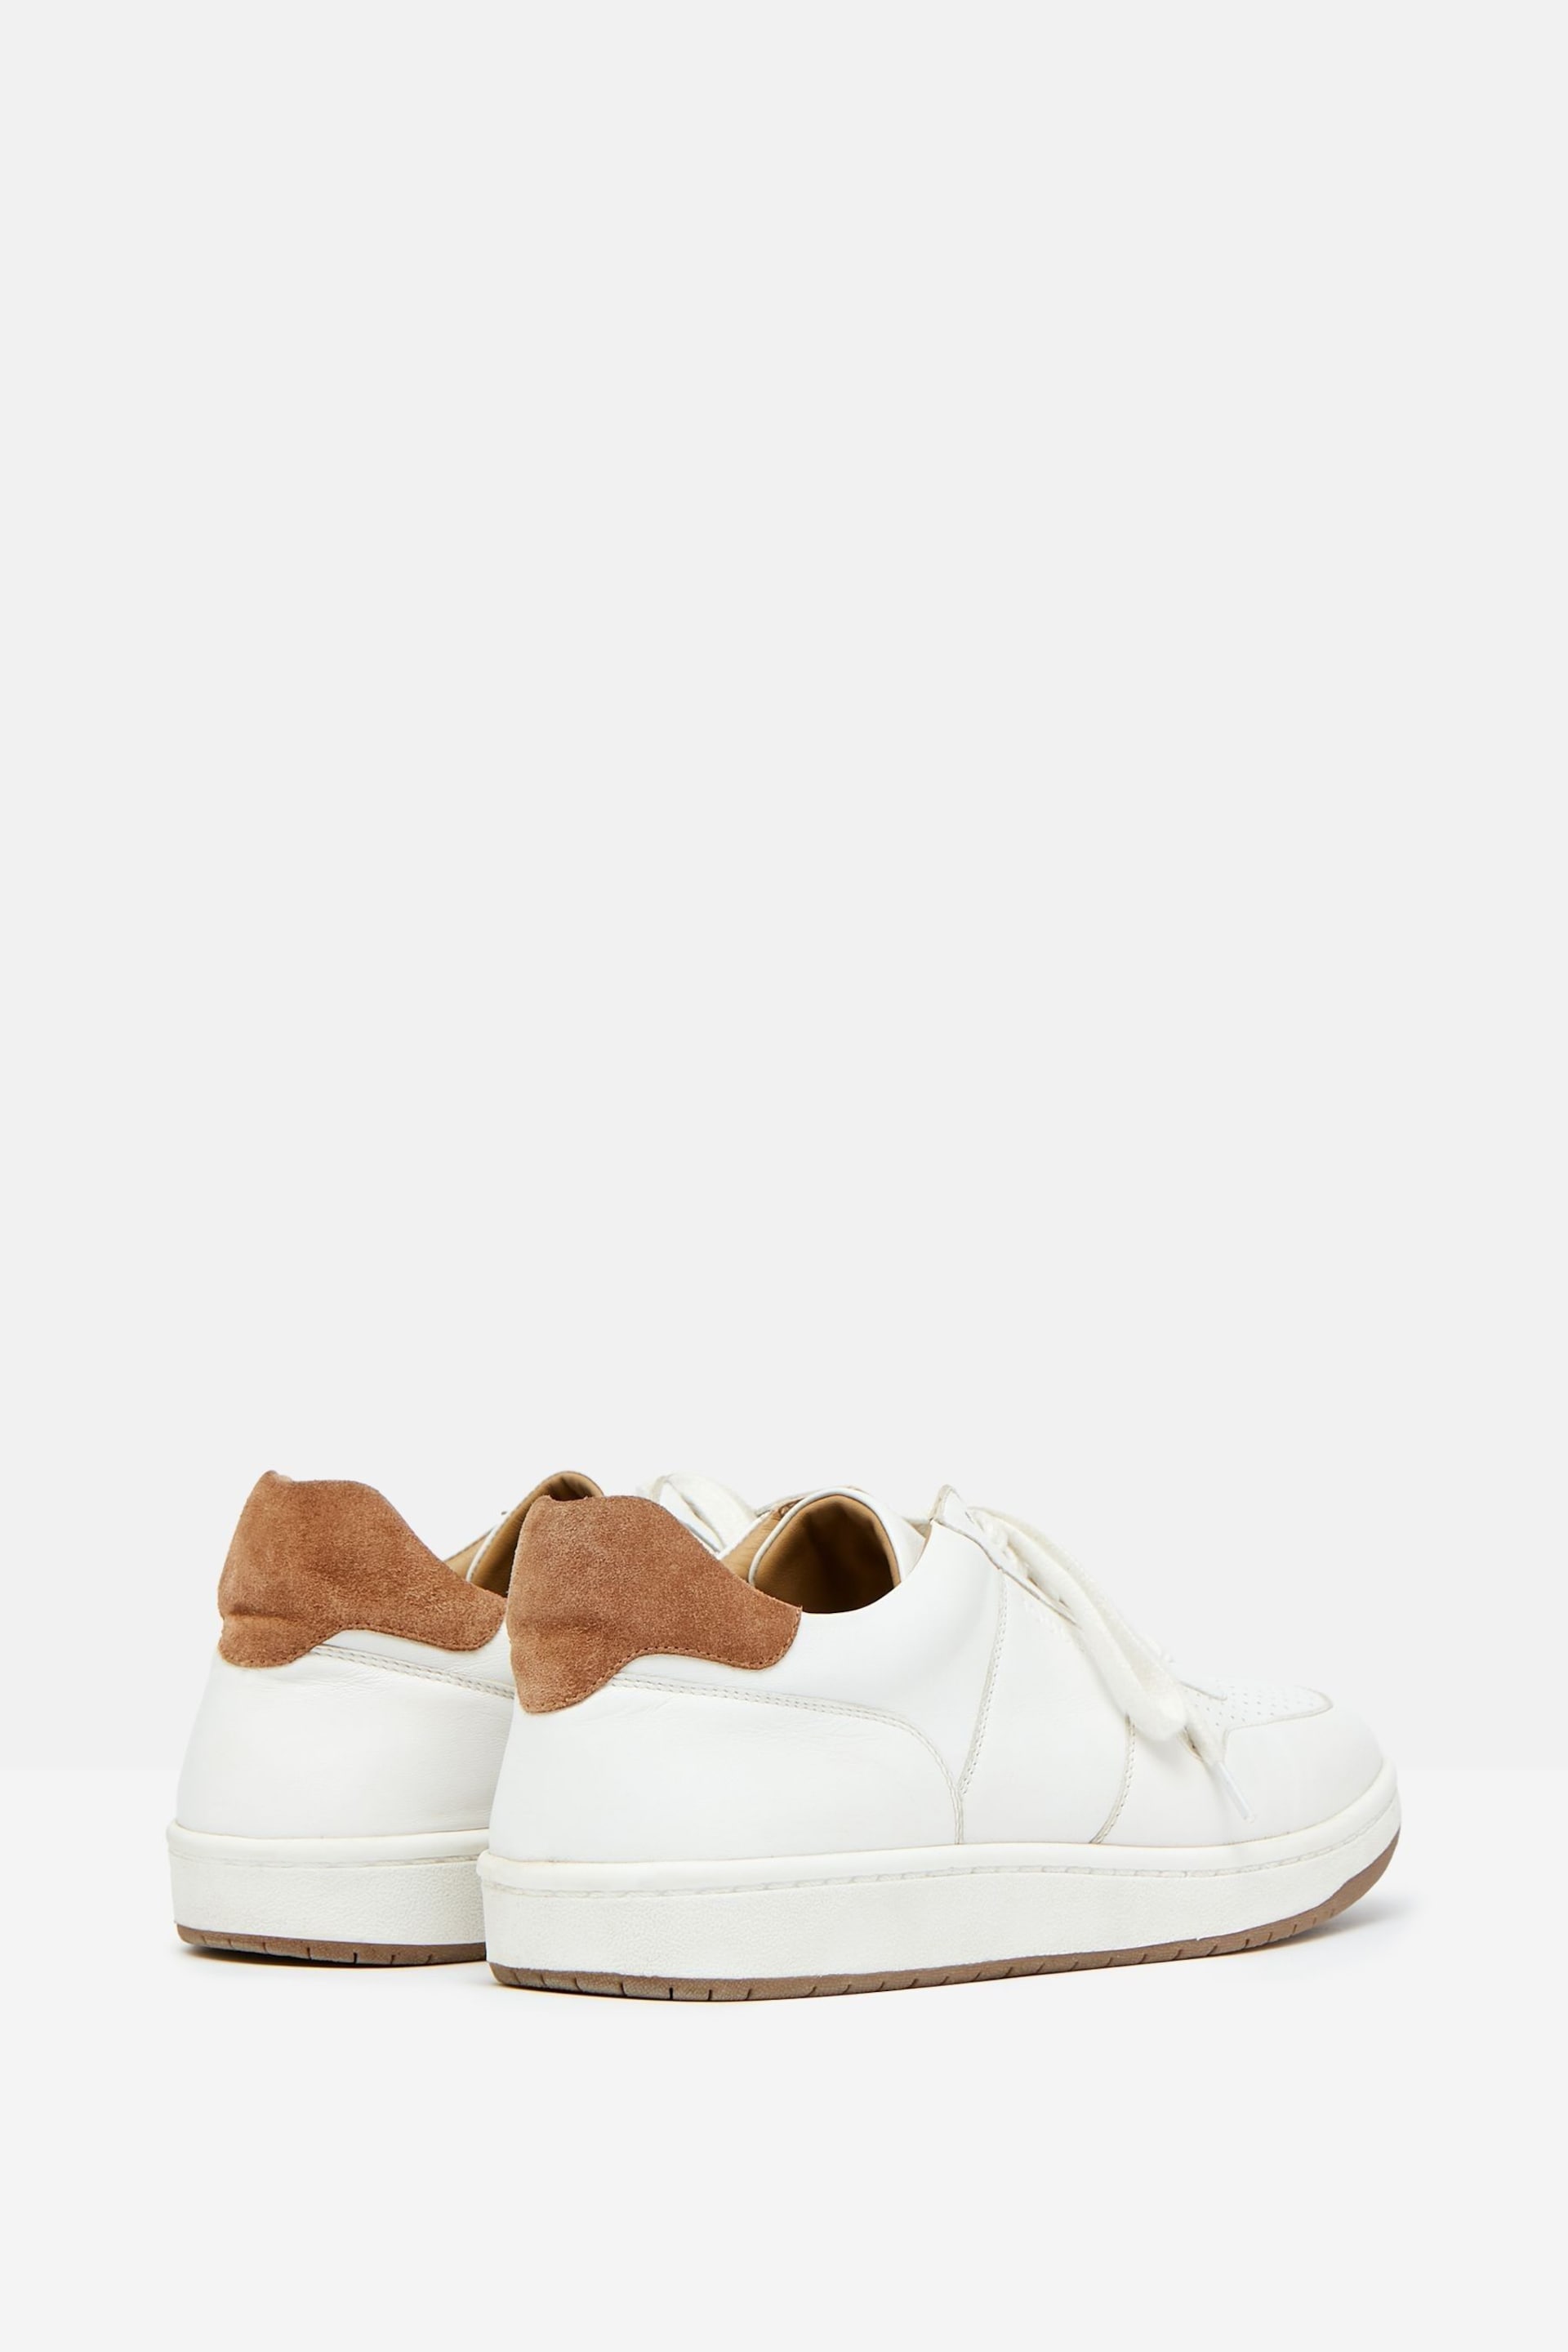 Joules Colston White Leather Trainers - Image 3 of 5